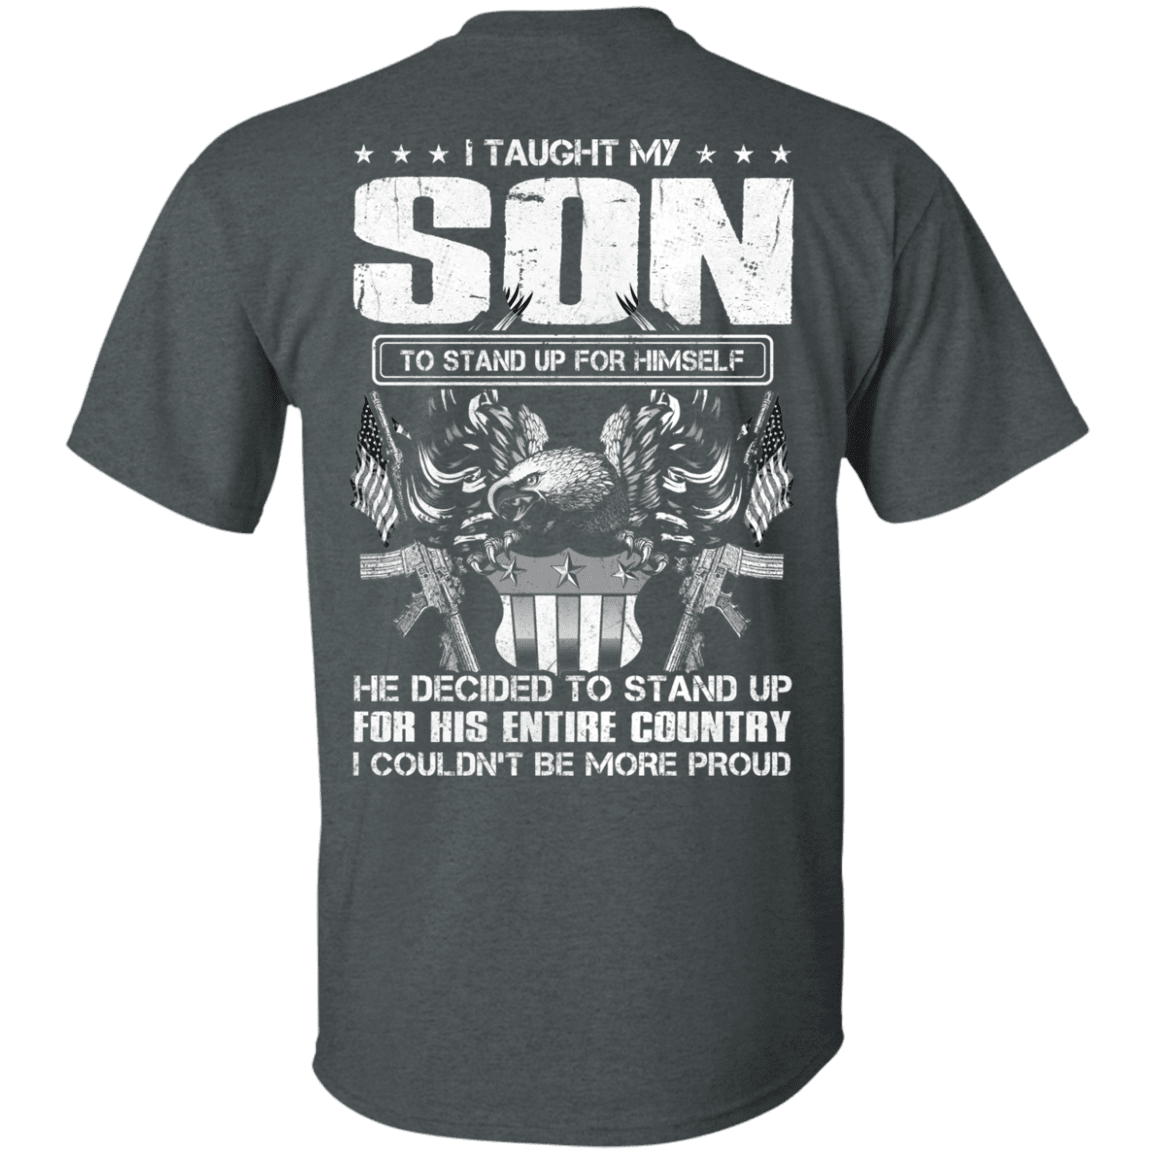 Military T-Shirt "Taught Son Stand up for Country" Men Back-TShirt-General-Veterans Nation